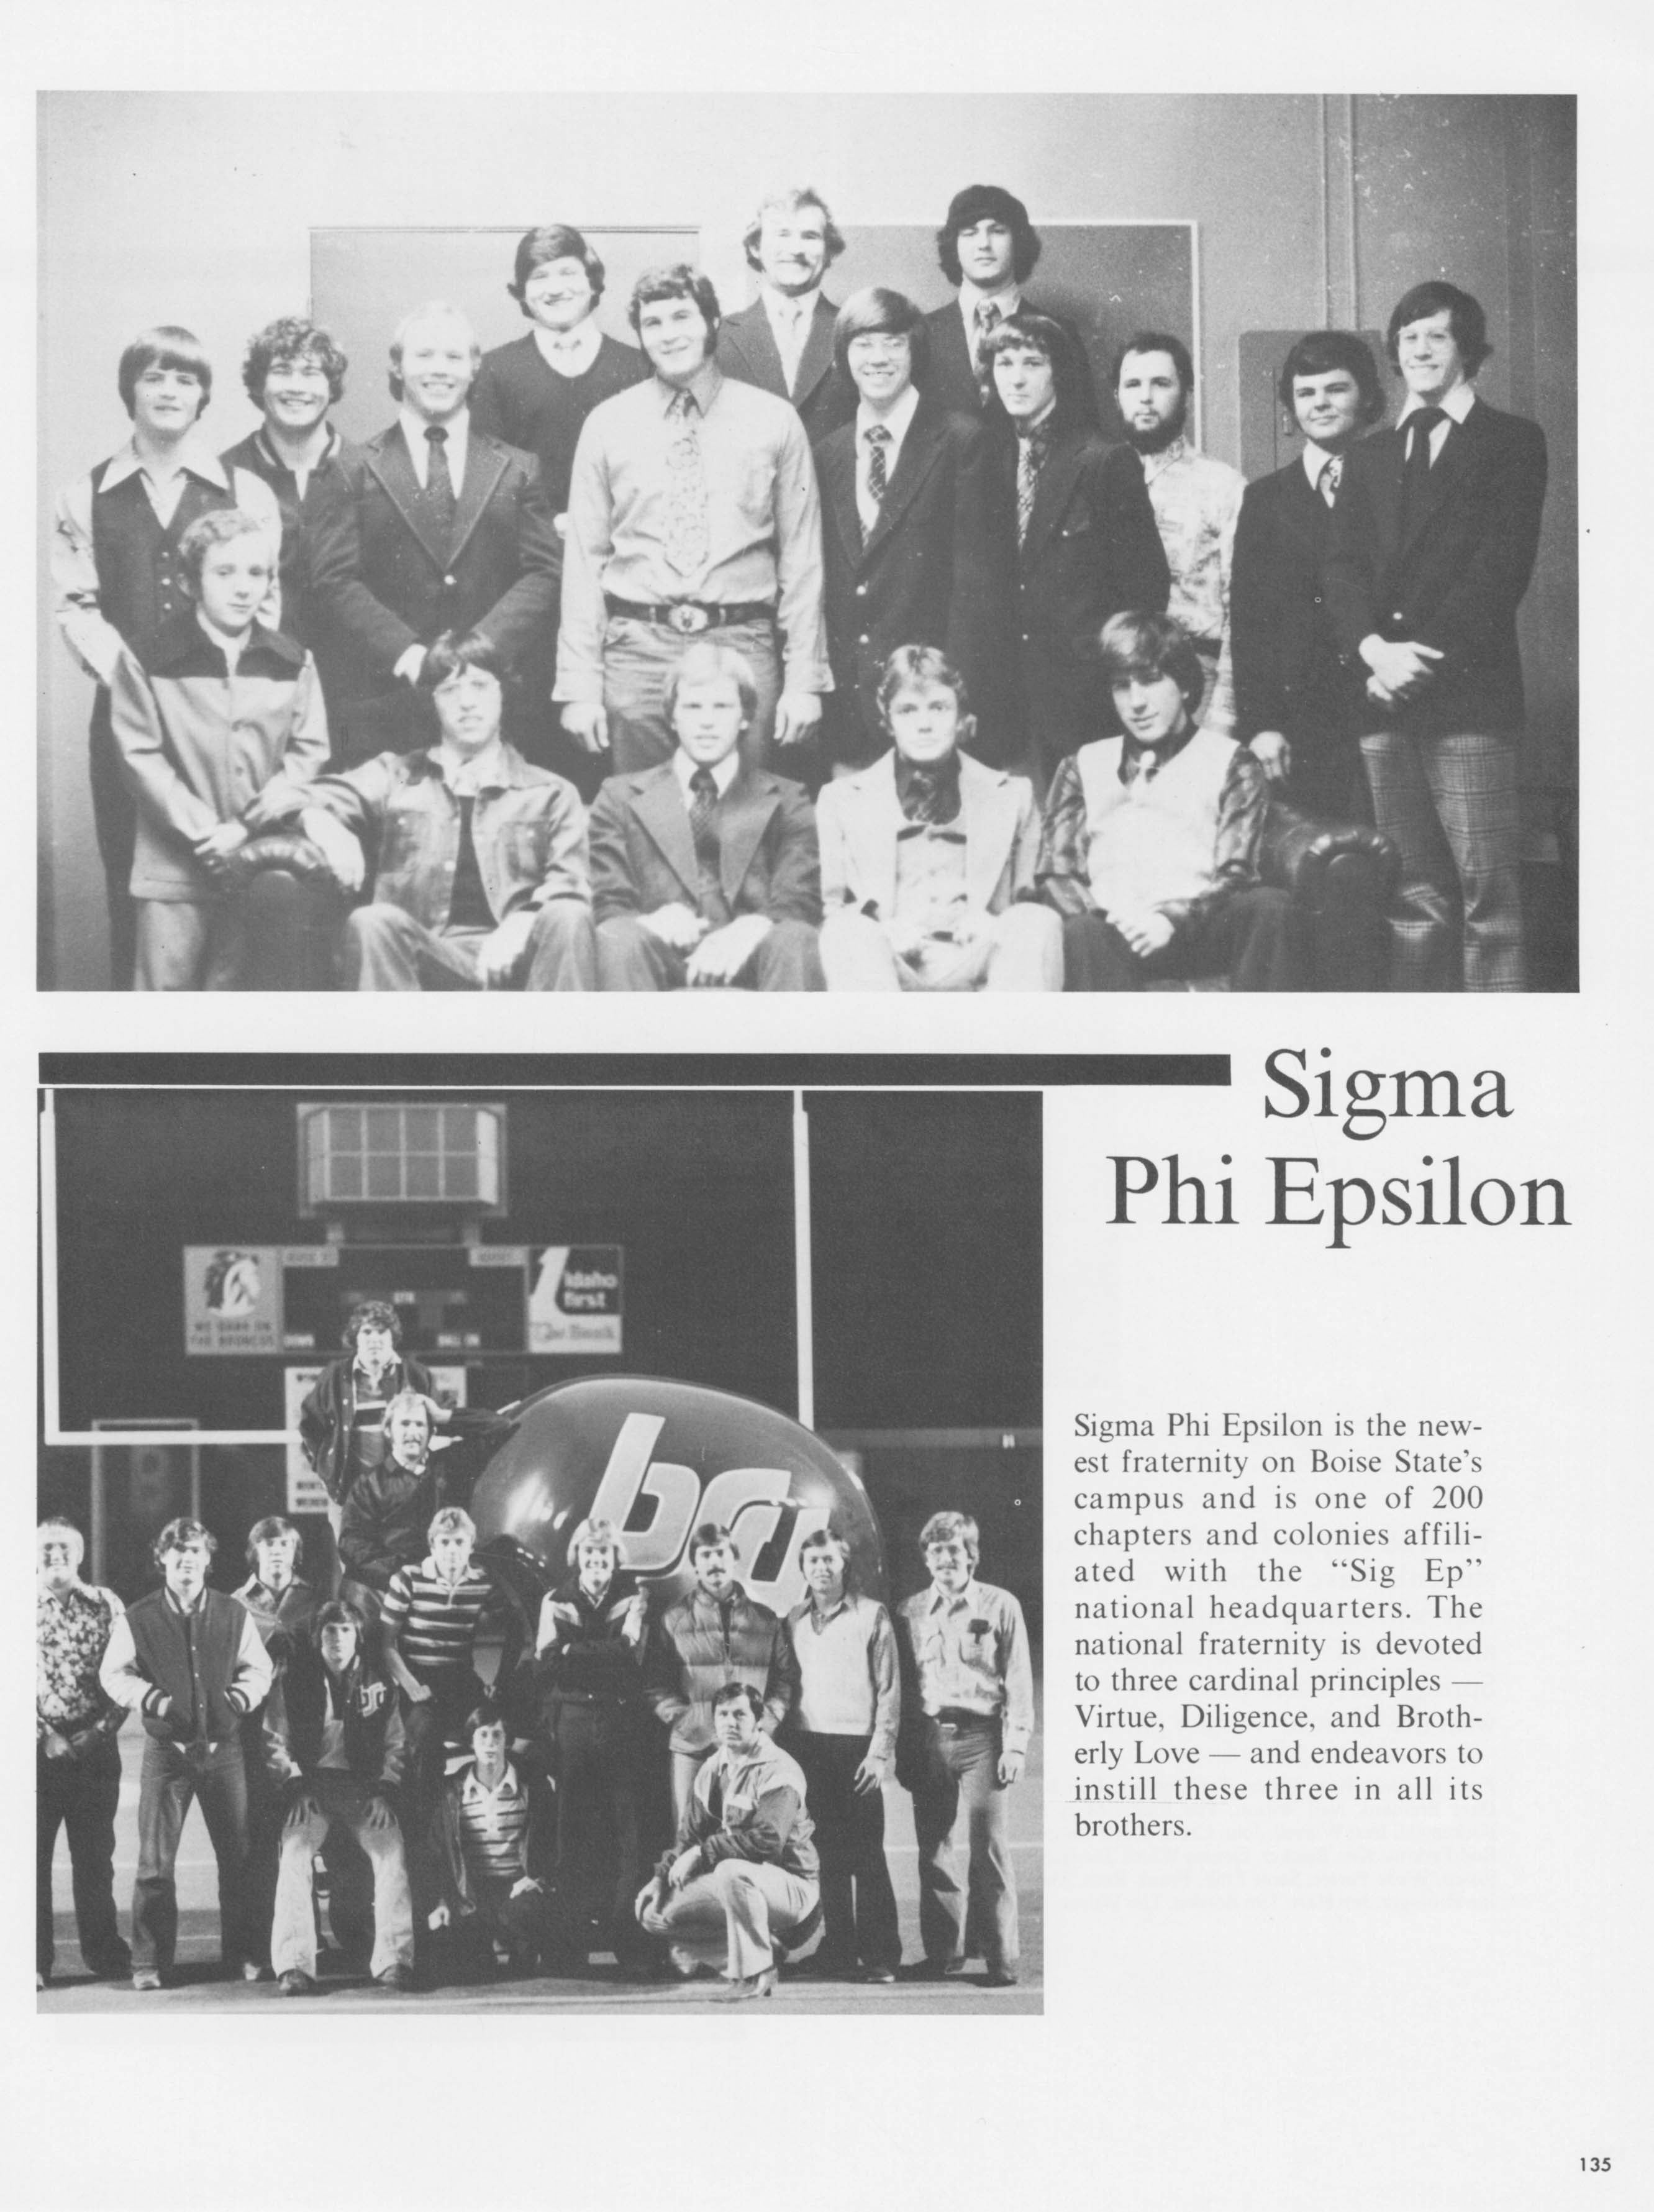 Yearbook page for Sigma Phi Epsilon with two group photos